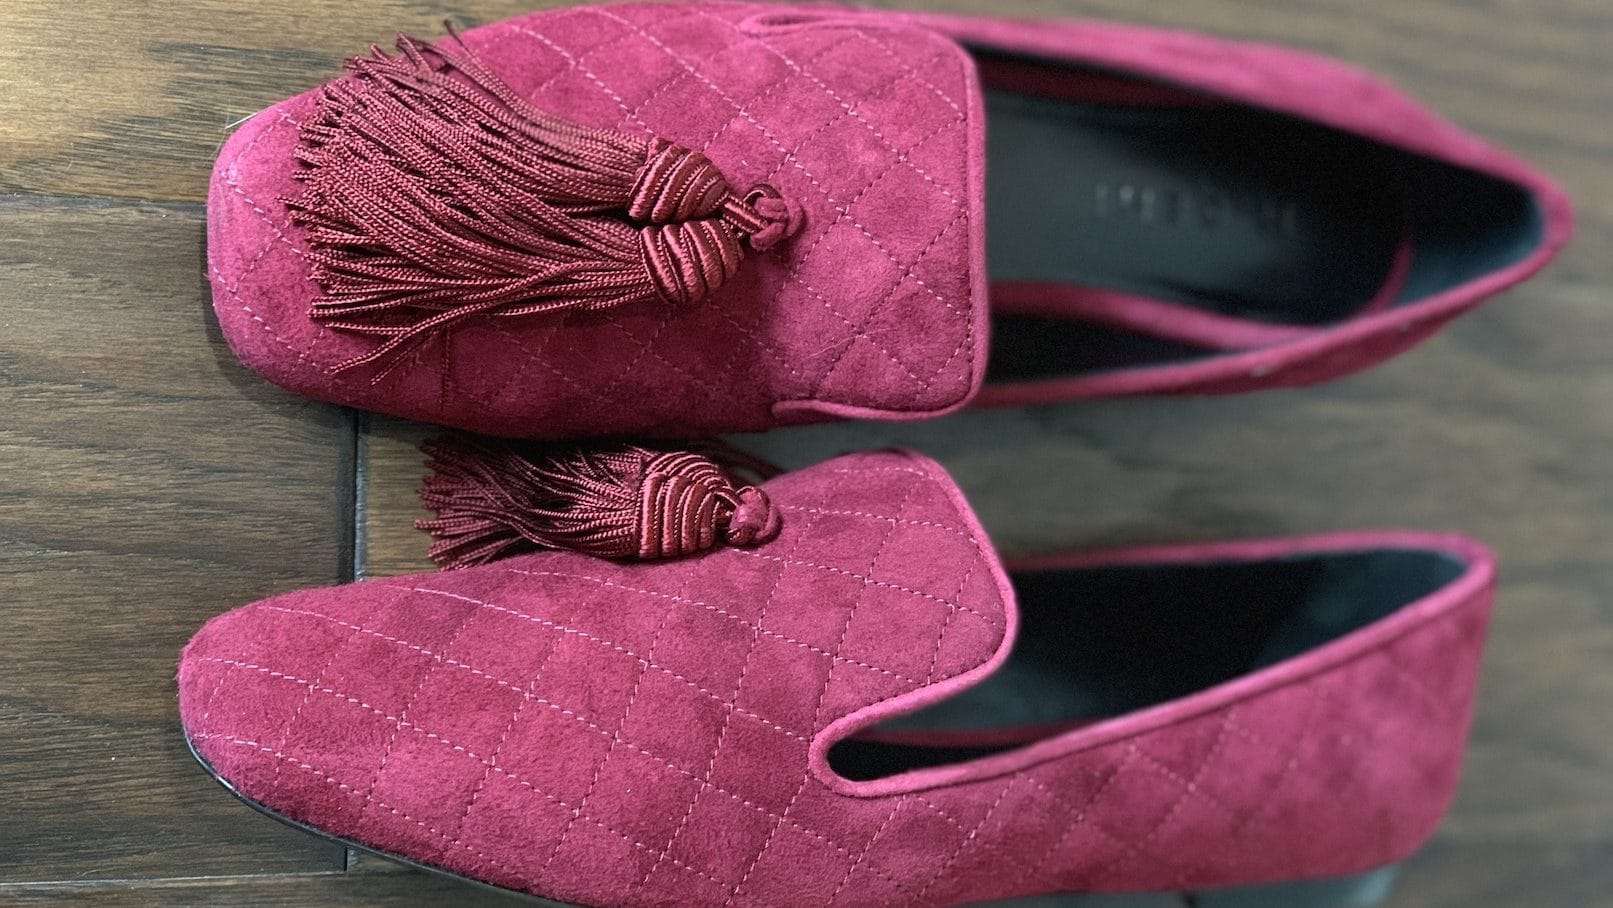 M.gemi Review: Honest Review Of The Italian Handcrafted Shoes